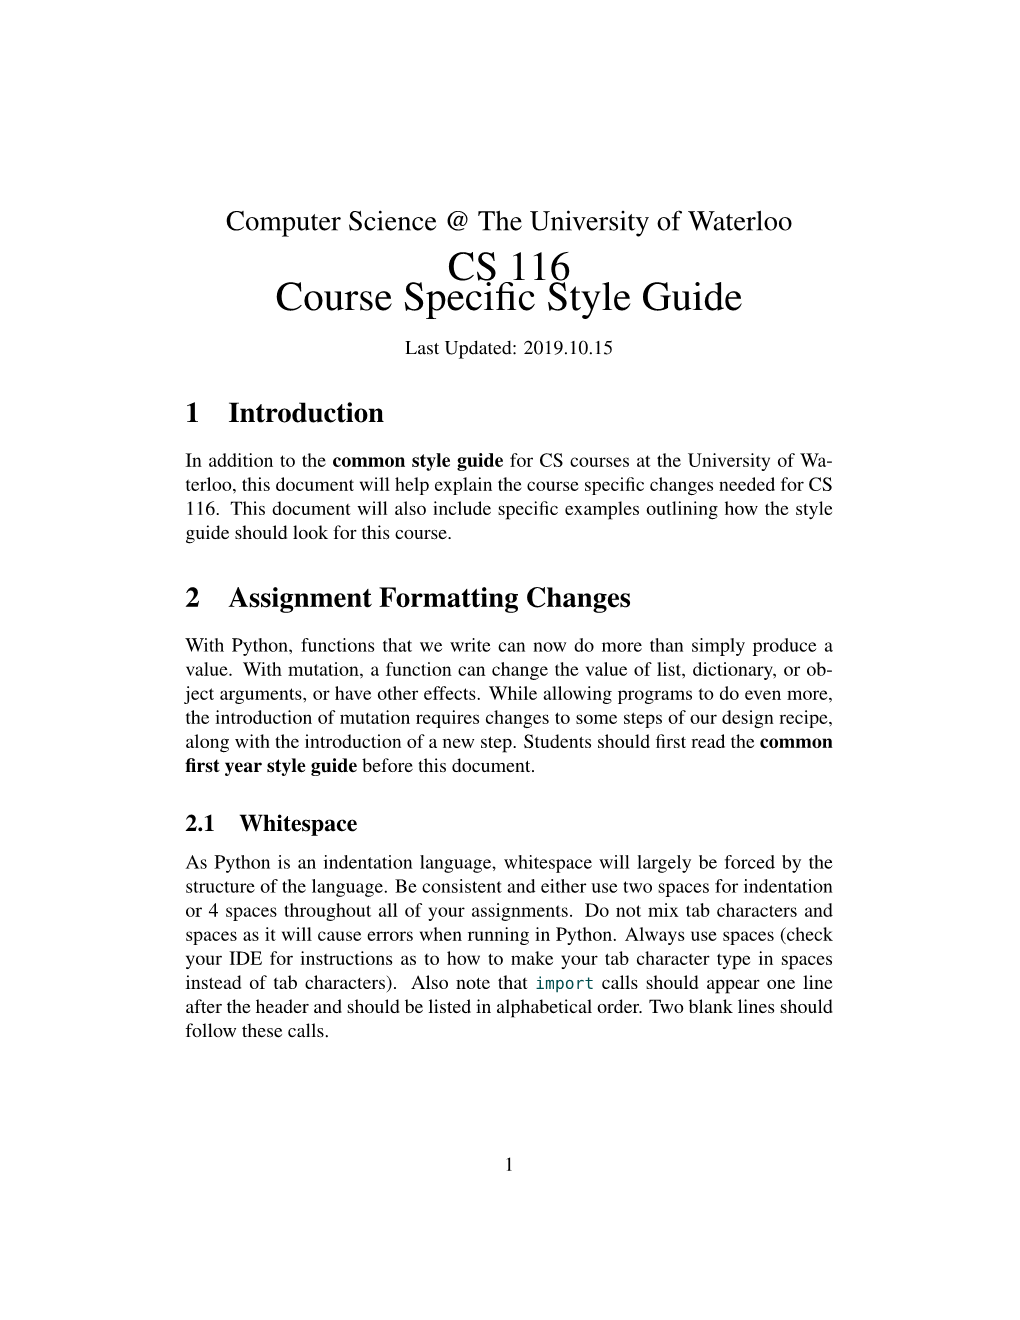 CS 116 Course Specific Style Guide